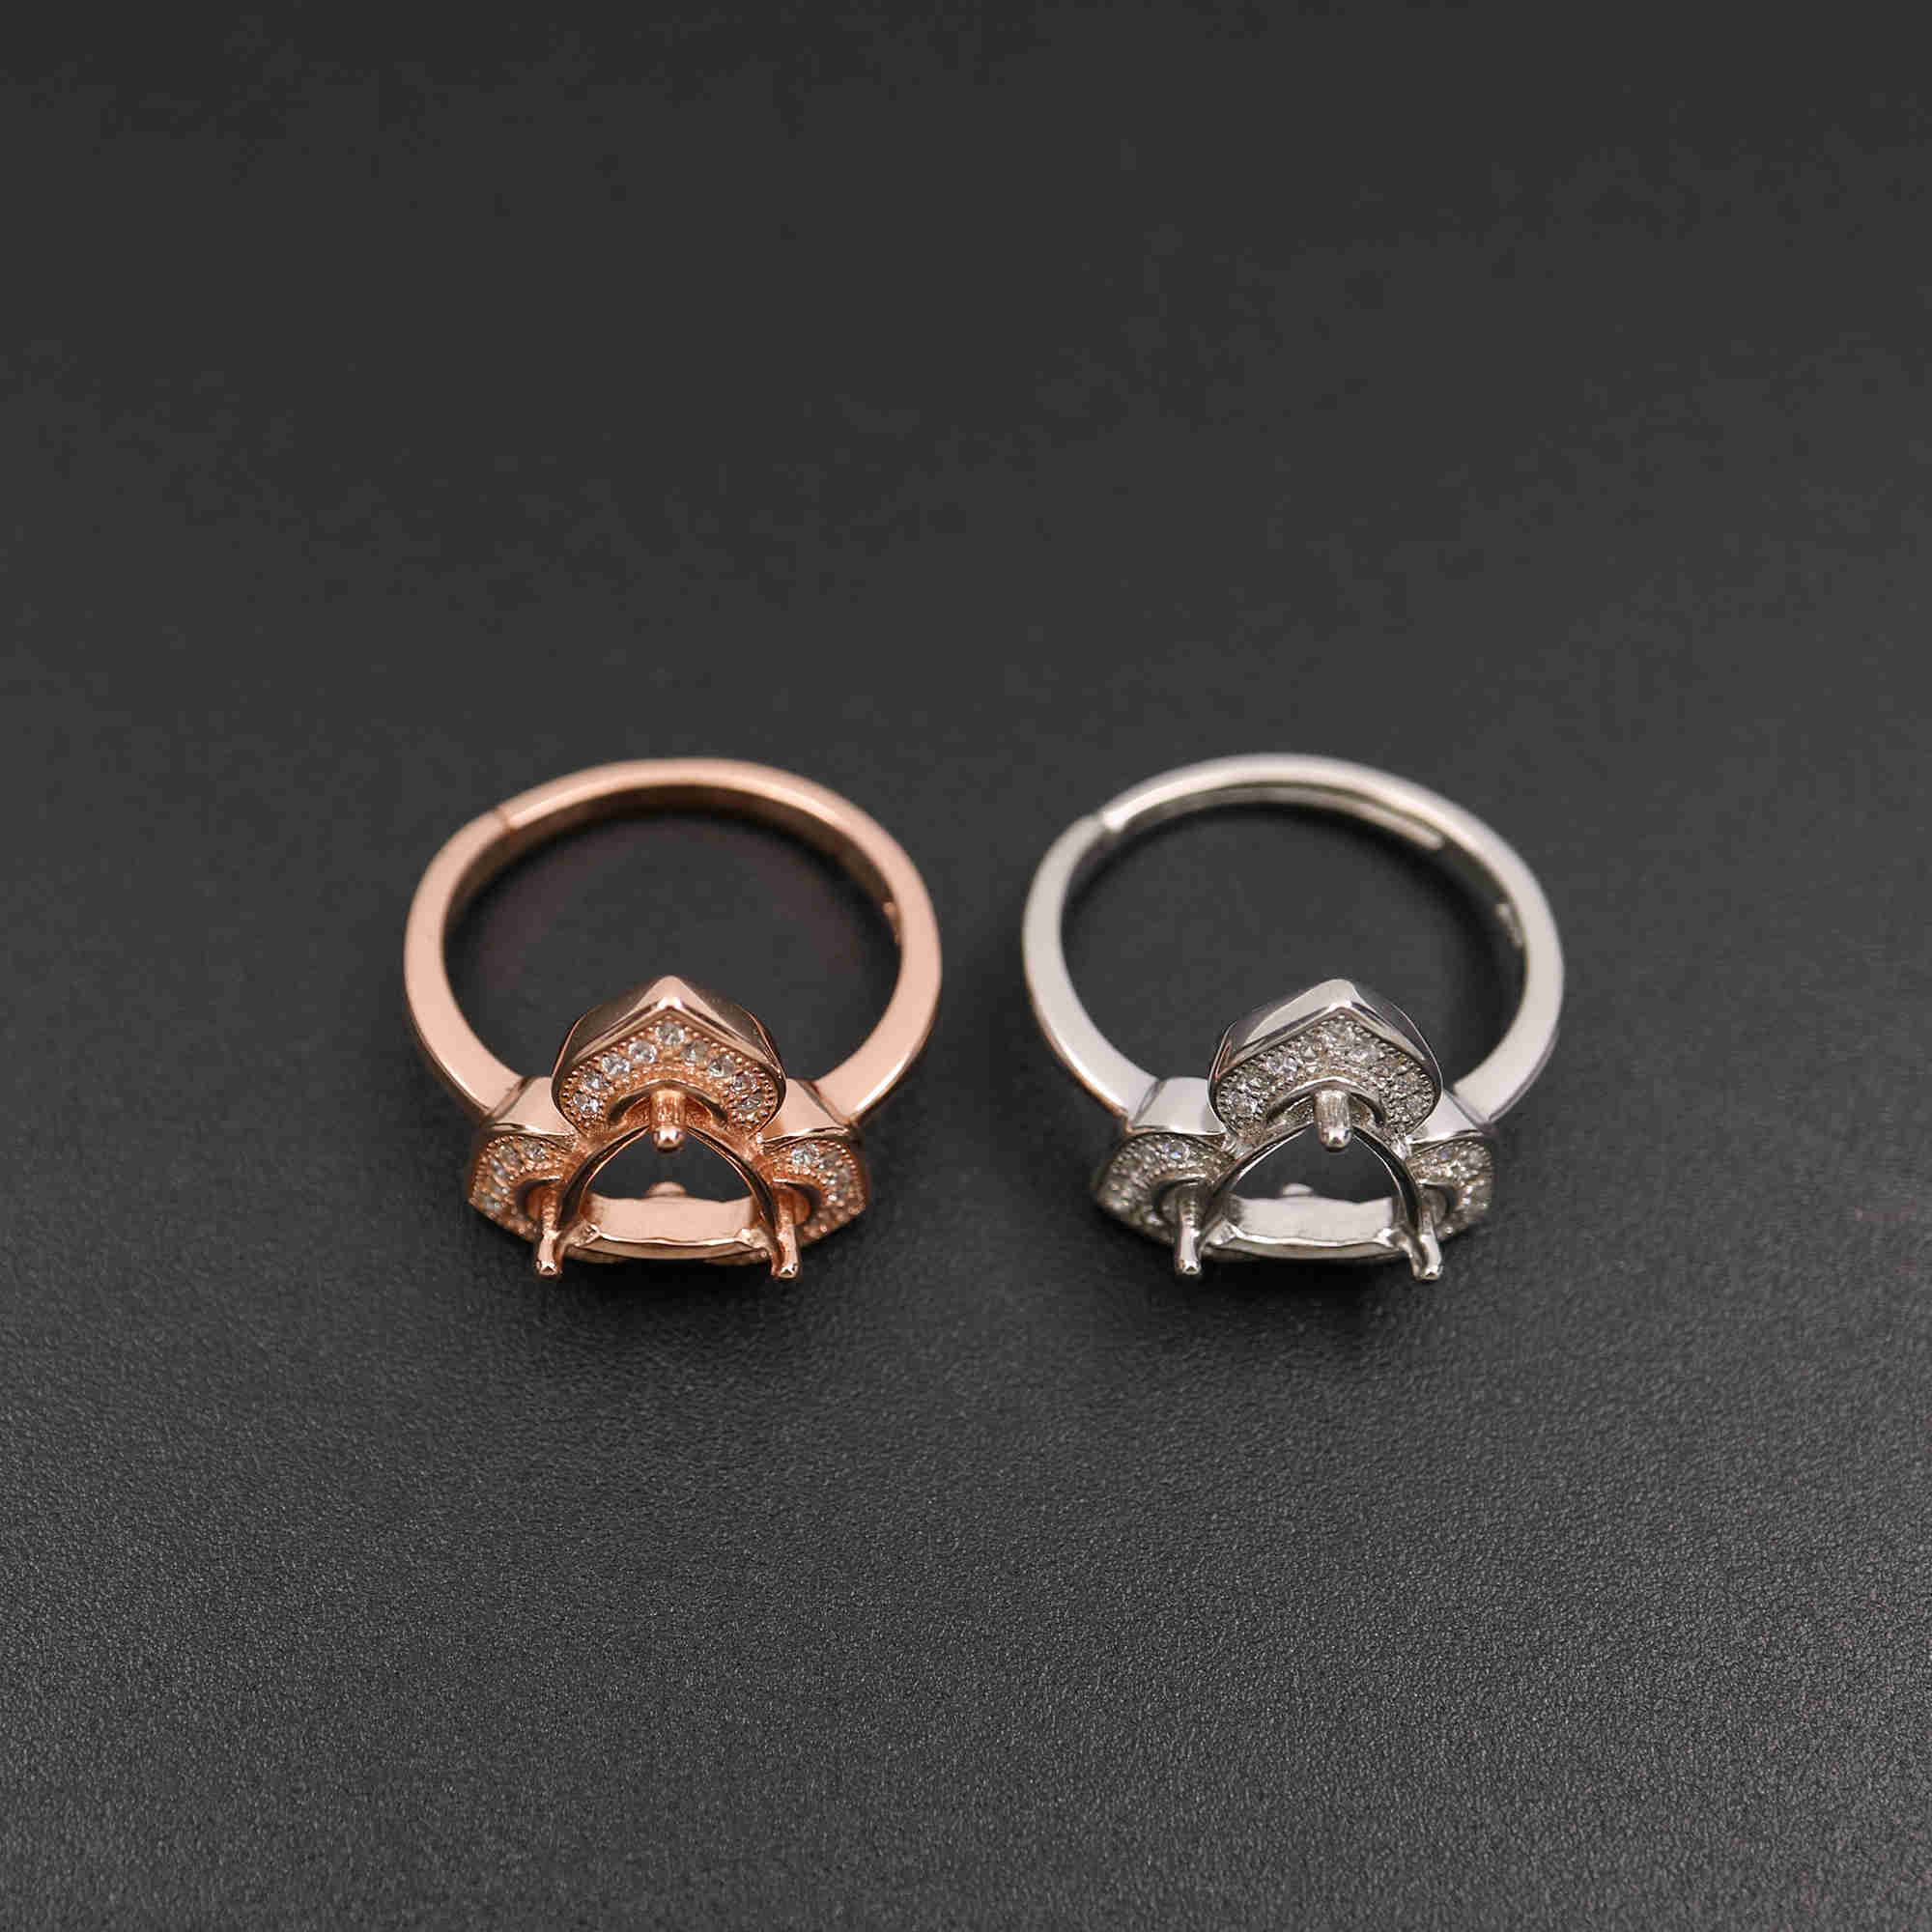 1Pcs 8MM Trillion Bezel Pave Flower Head Rose Gold Plated Solid 925 Sterling Silver Adjustable Ring Settings For DIY Gems Moissanite Stone 1294155 - Click Image to Close